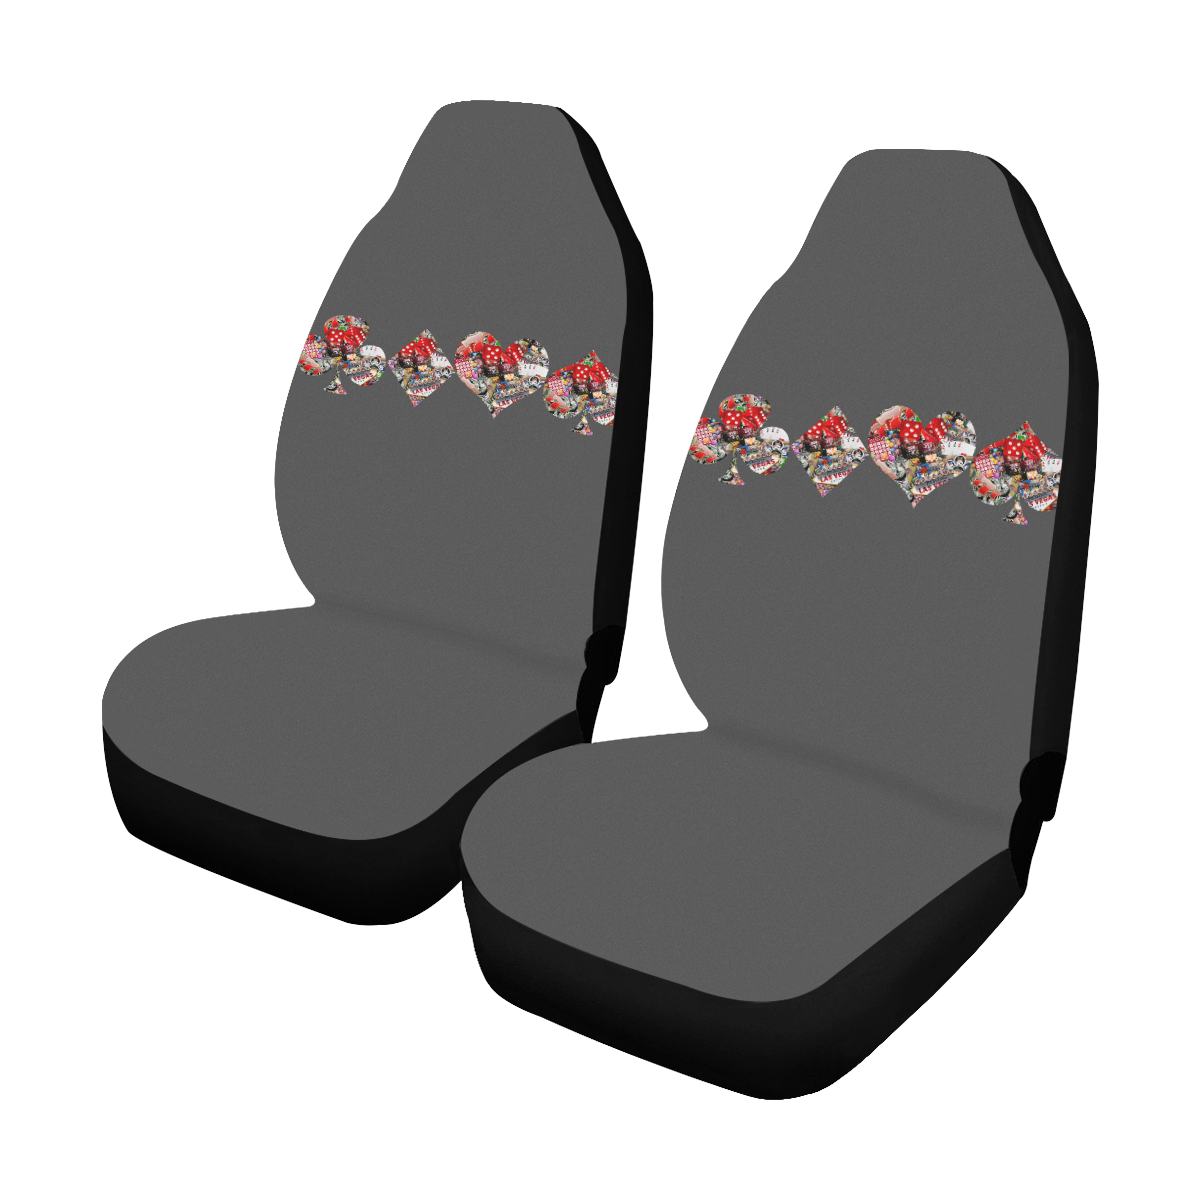 Las Vegas Playing Card Shapes Car Seat Covers (Set of 2)